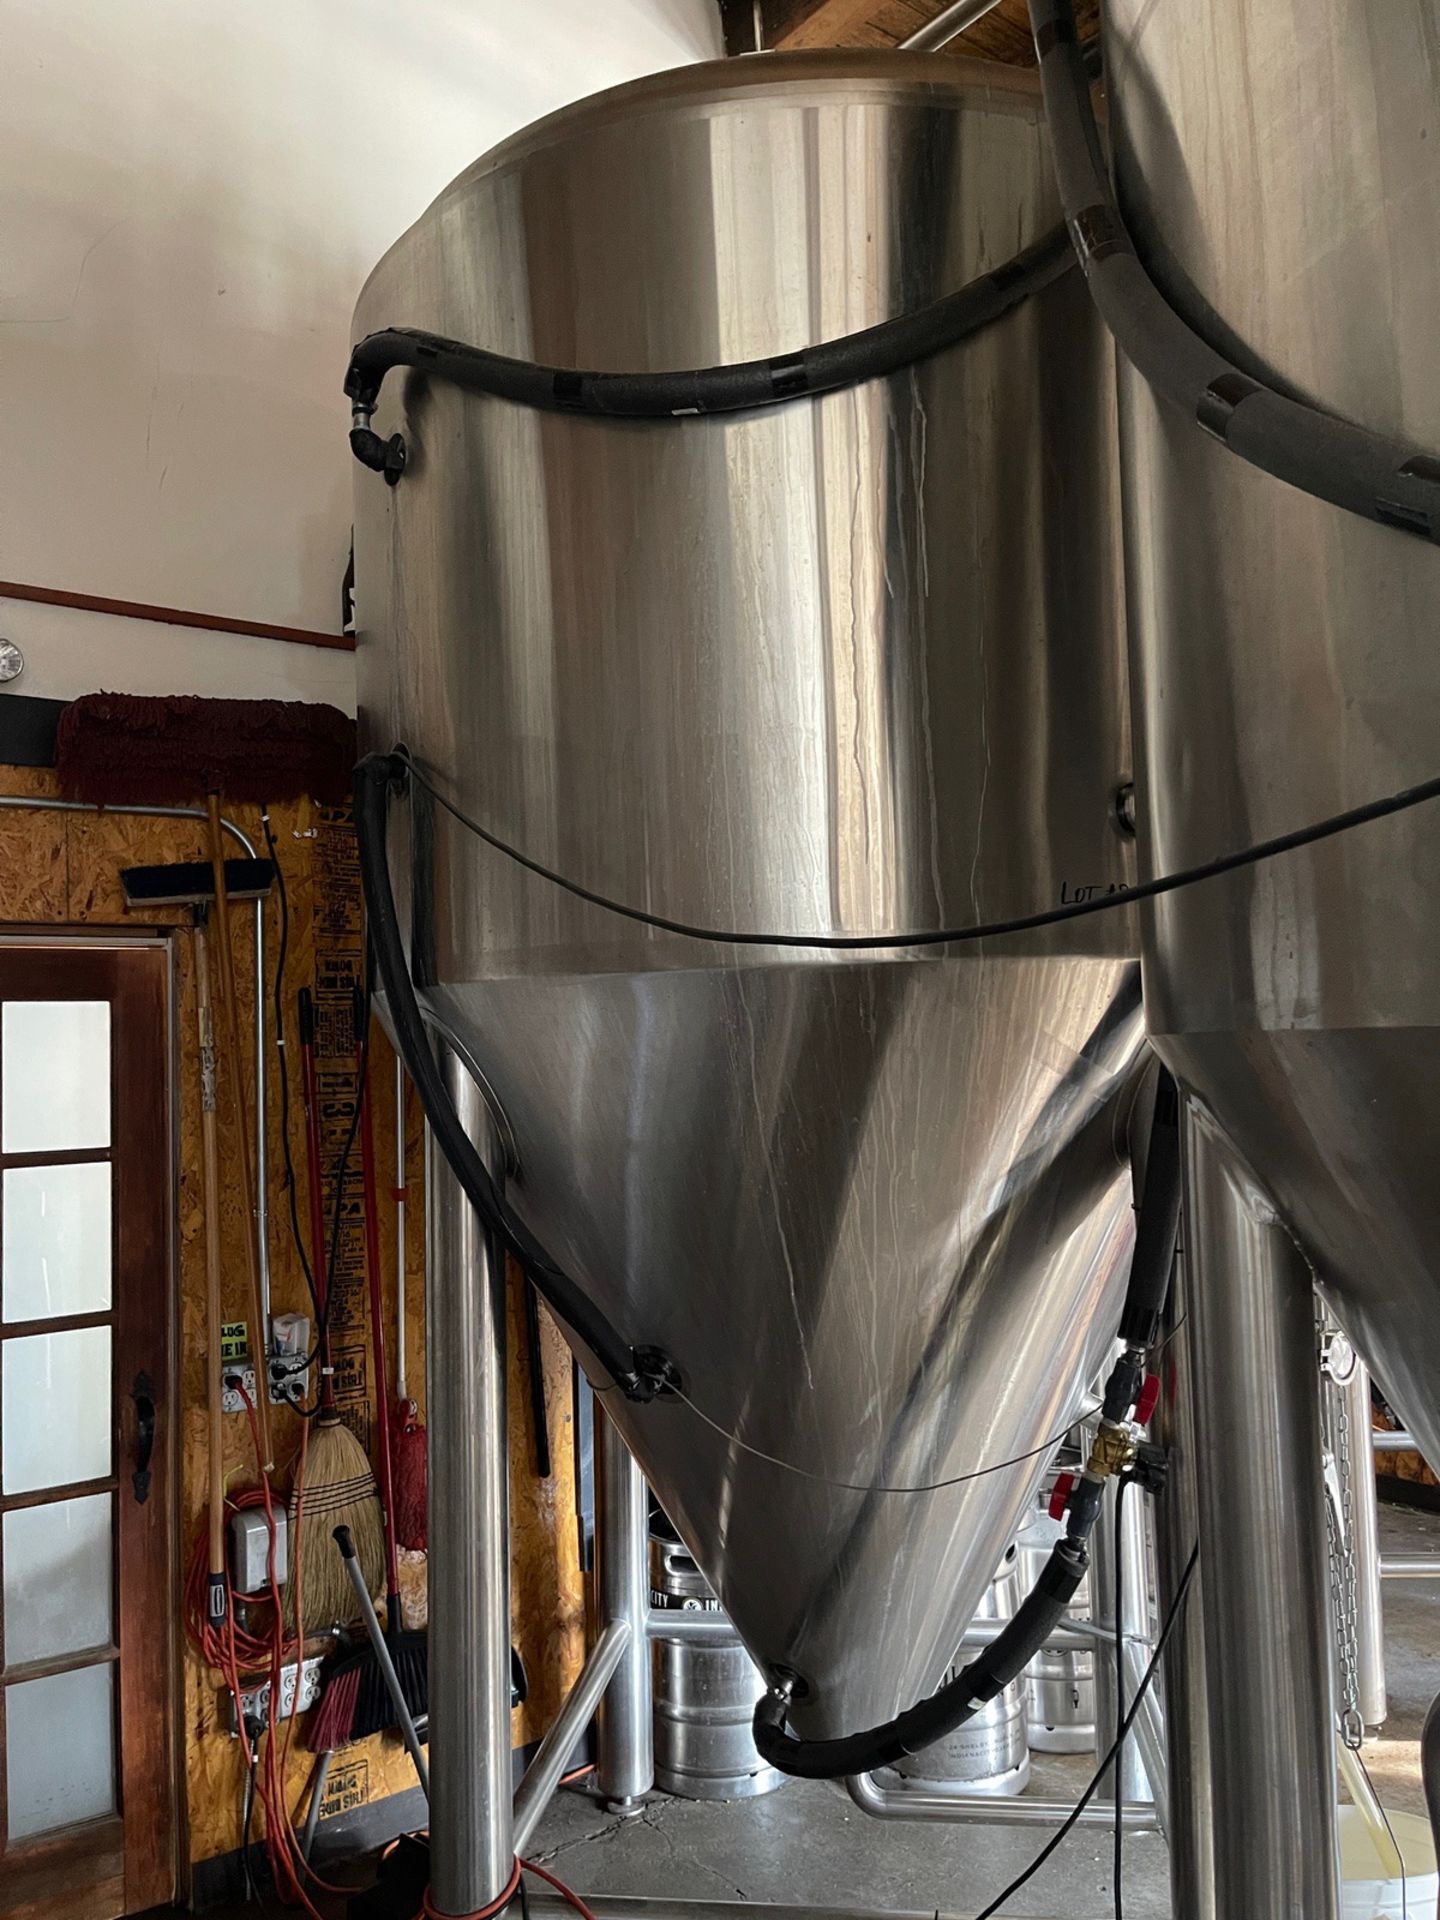 2017 30 BBL G.W. Kent Stainless Steel Fermentation Tank (Approx: 6' x 12') | Rig Fee $1000 - Image 4 of 4